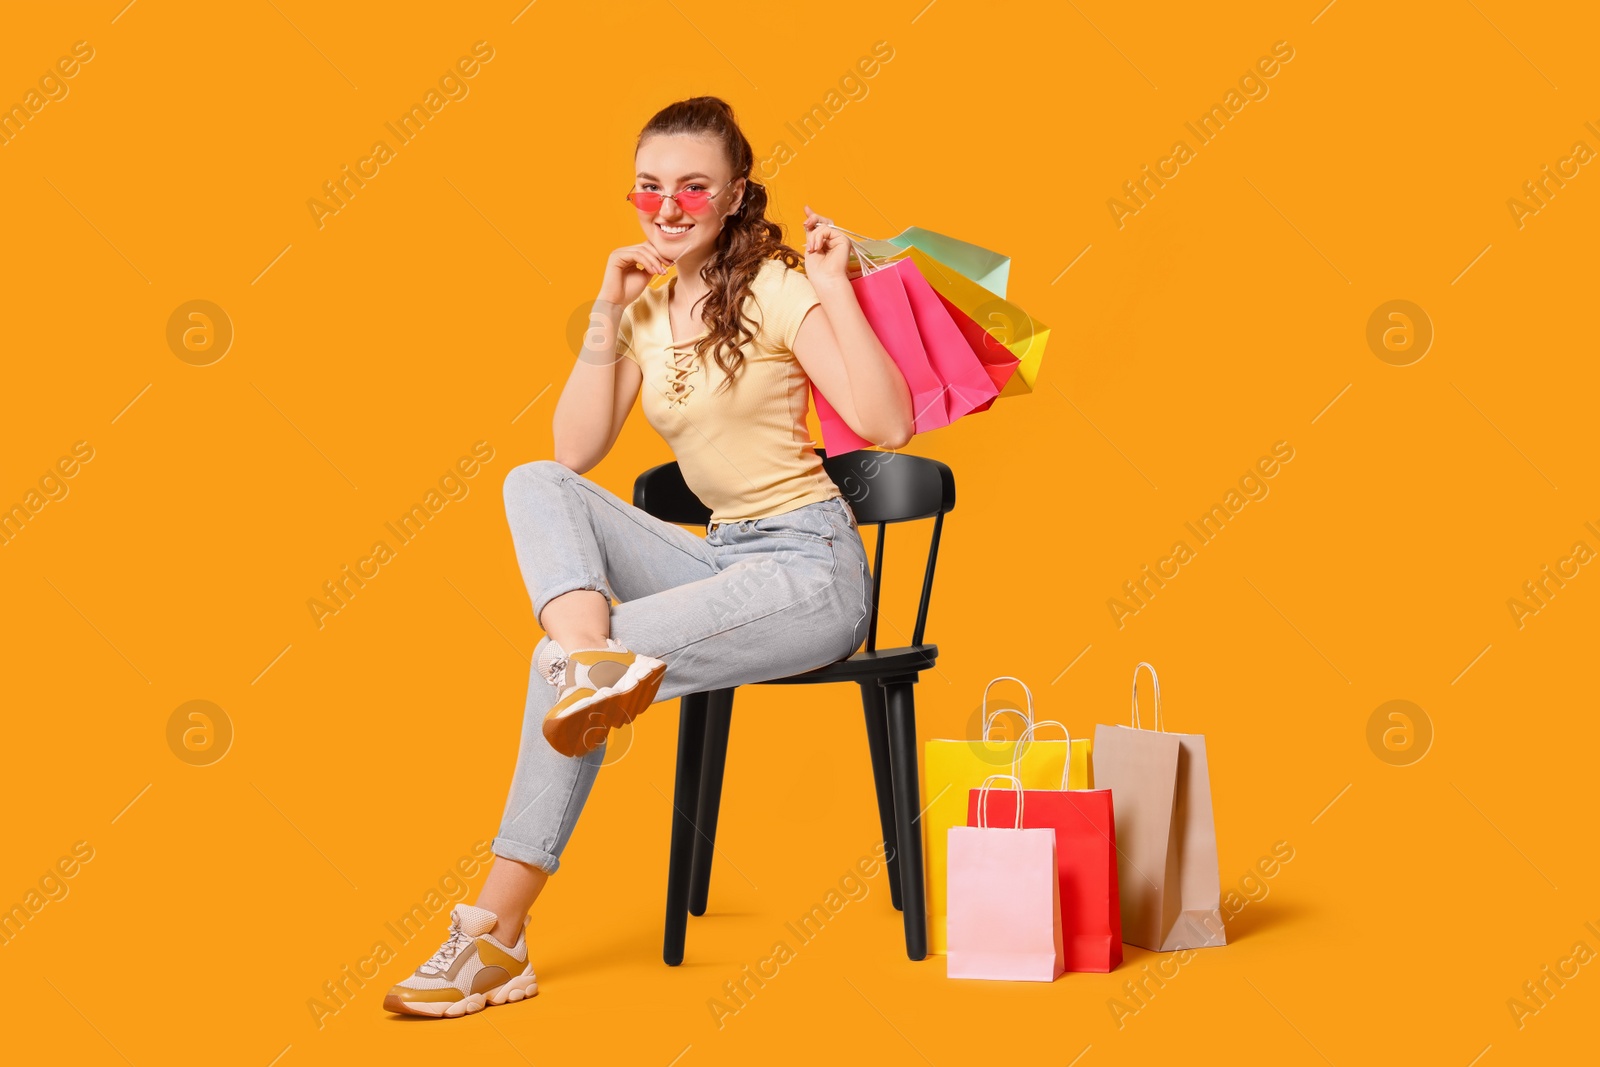 Photo of Happy woman in stylish sunglasses holding colorful shopping bags on chair against orange background